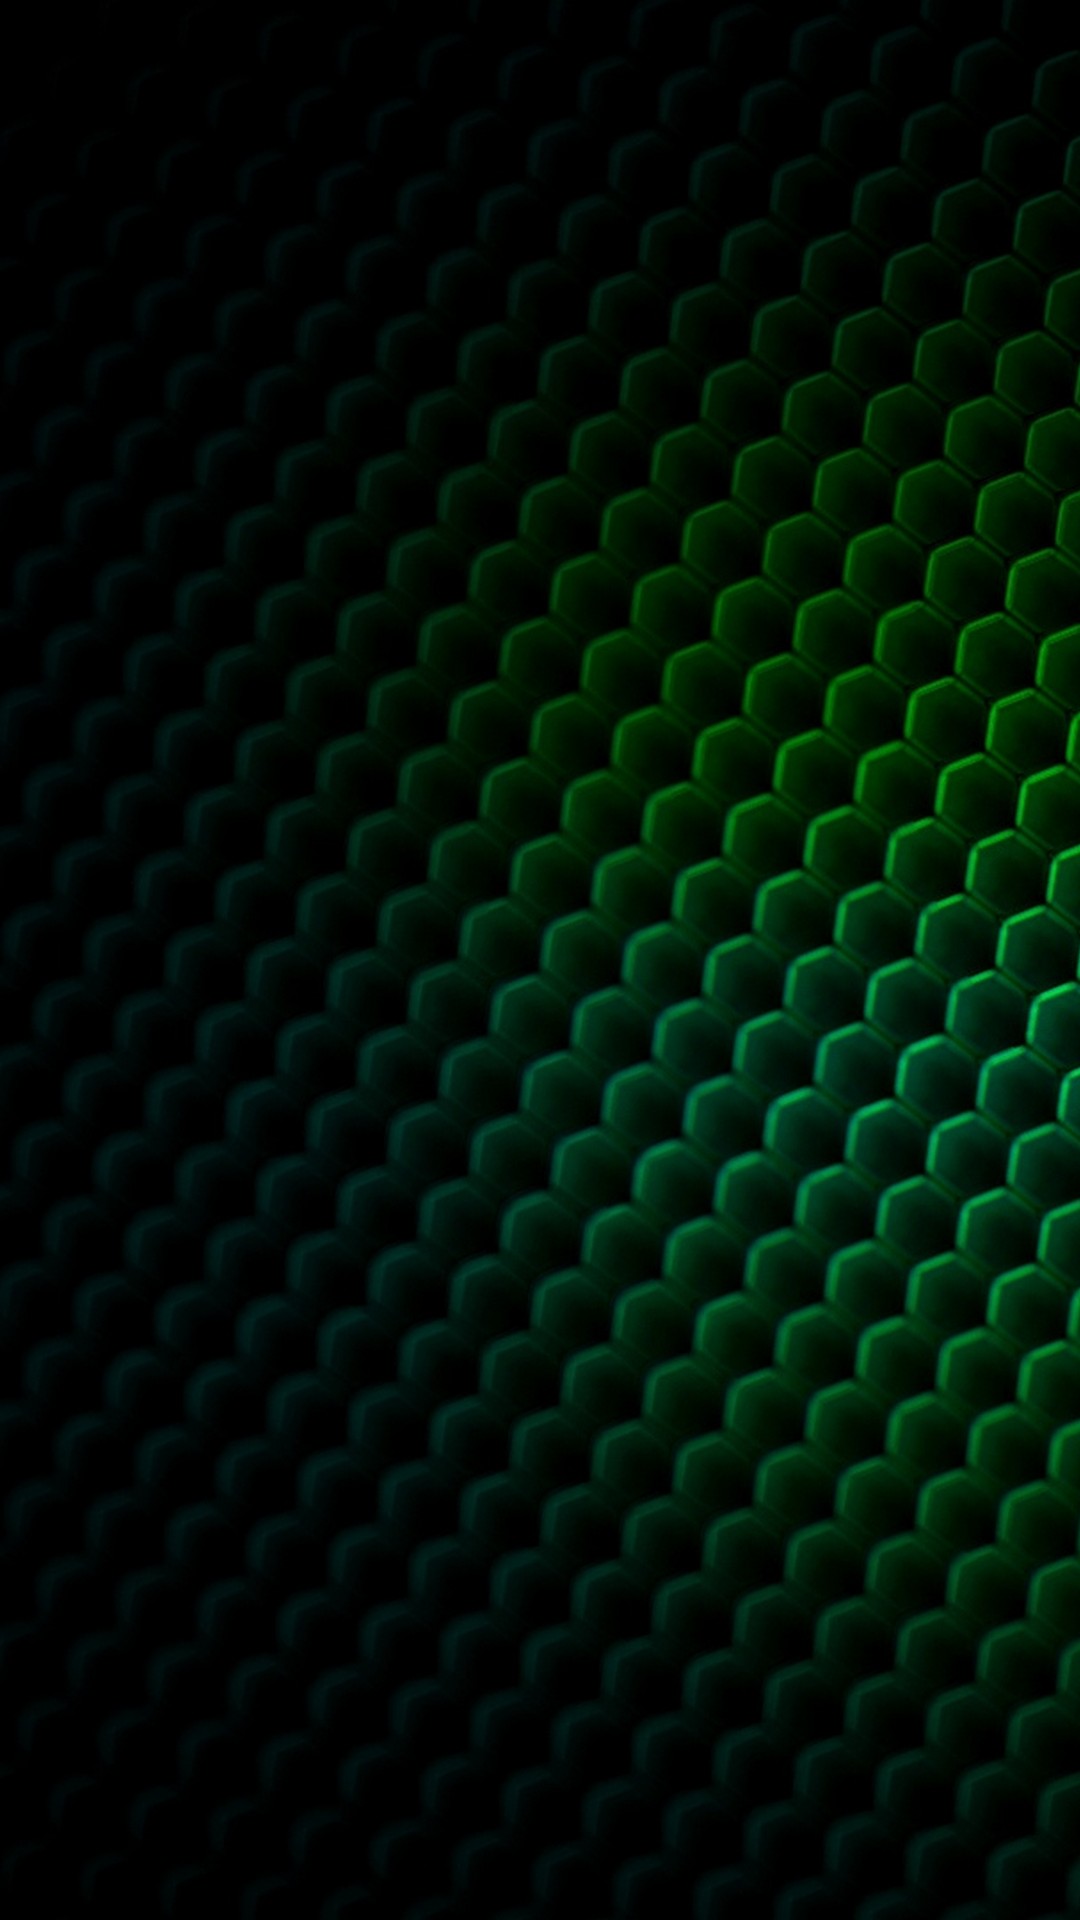 Black and Green Wallpaper For Android with resolution 1080X1920 pixel. You can make this wallpaper for your Android backgrounds, Tablet, Smartphones Screensavers and Mobile Phone Lock Screen